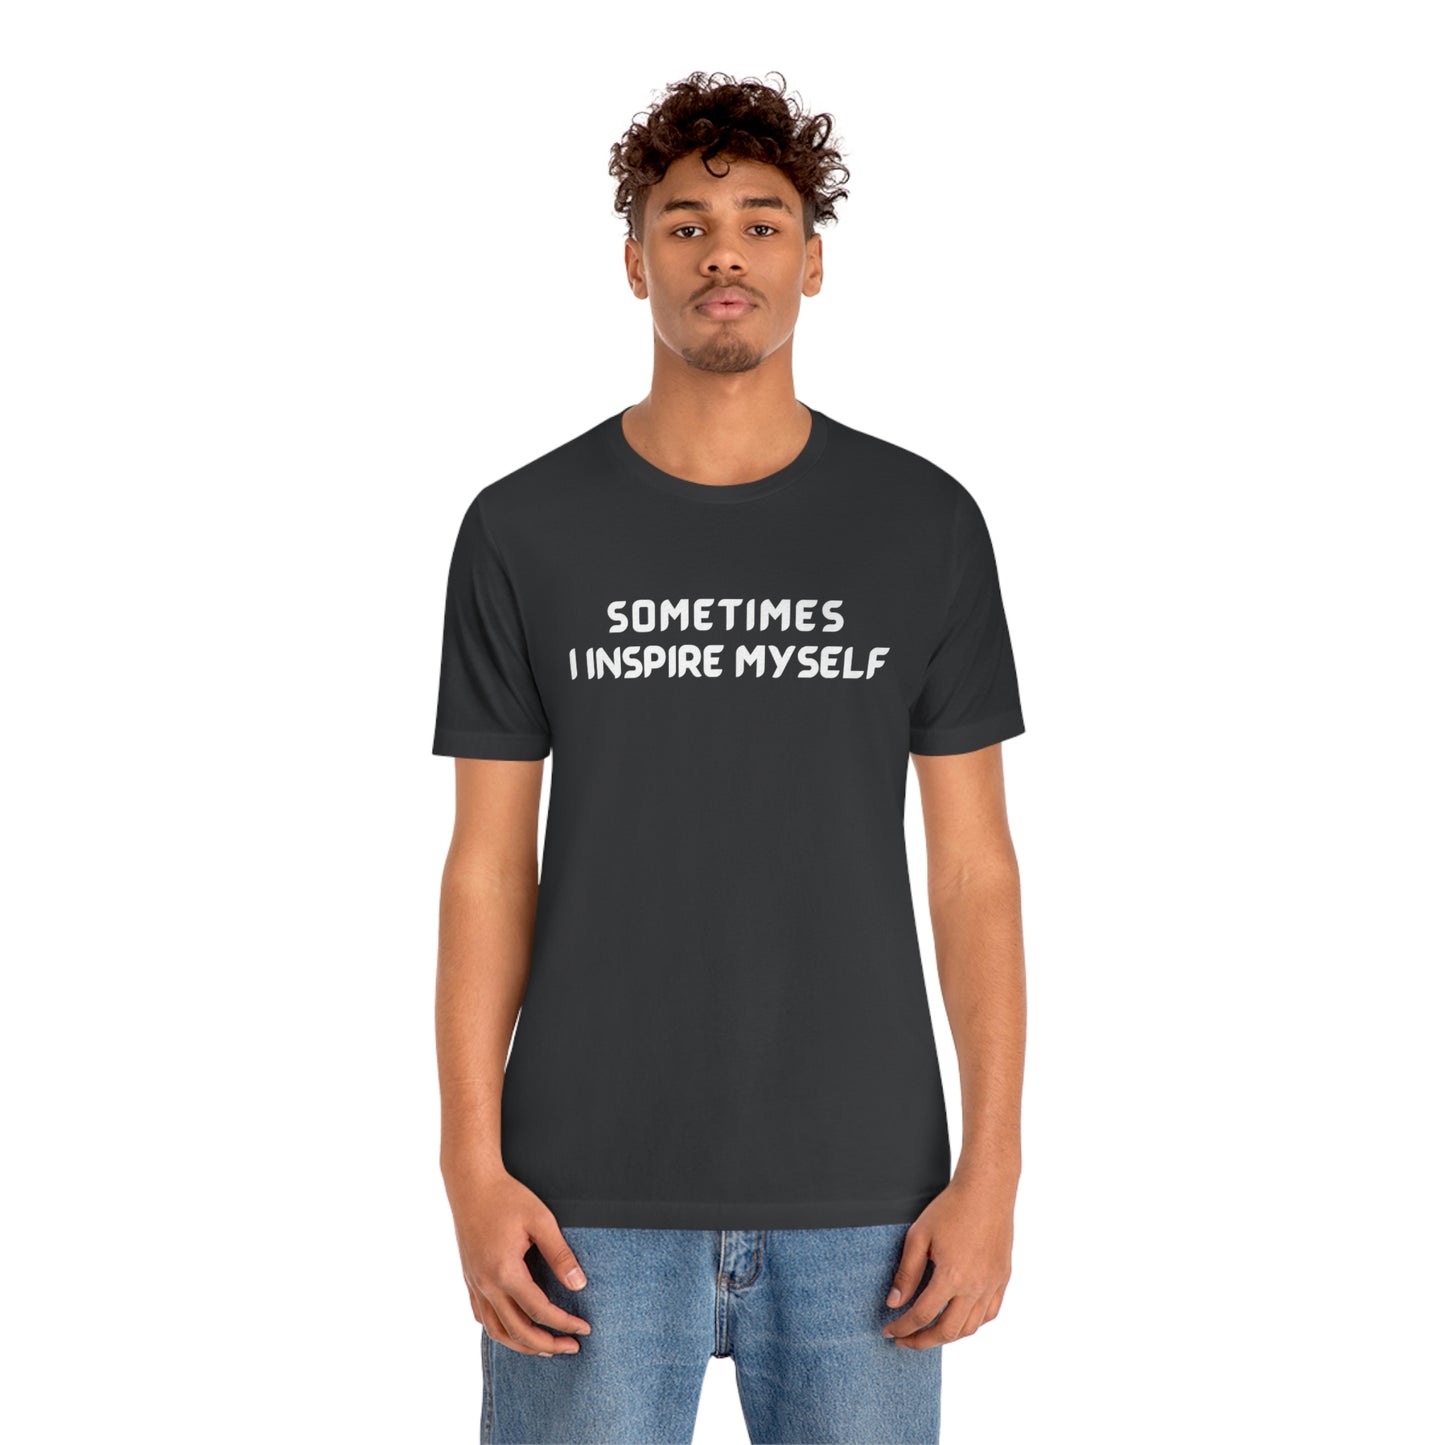 Sometimes I inspire myself unisex t shirt gift, t shirt gift with meaningful words,